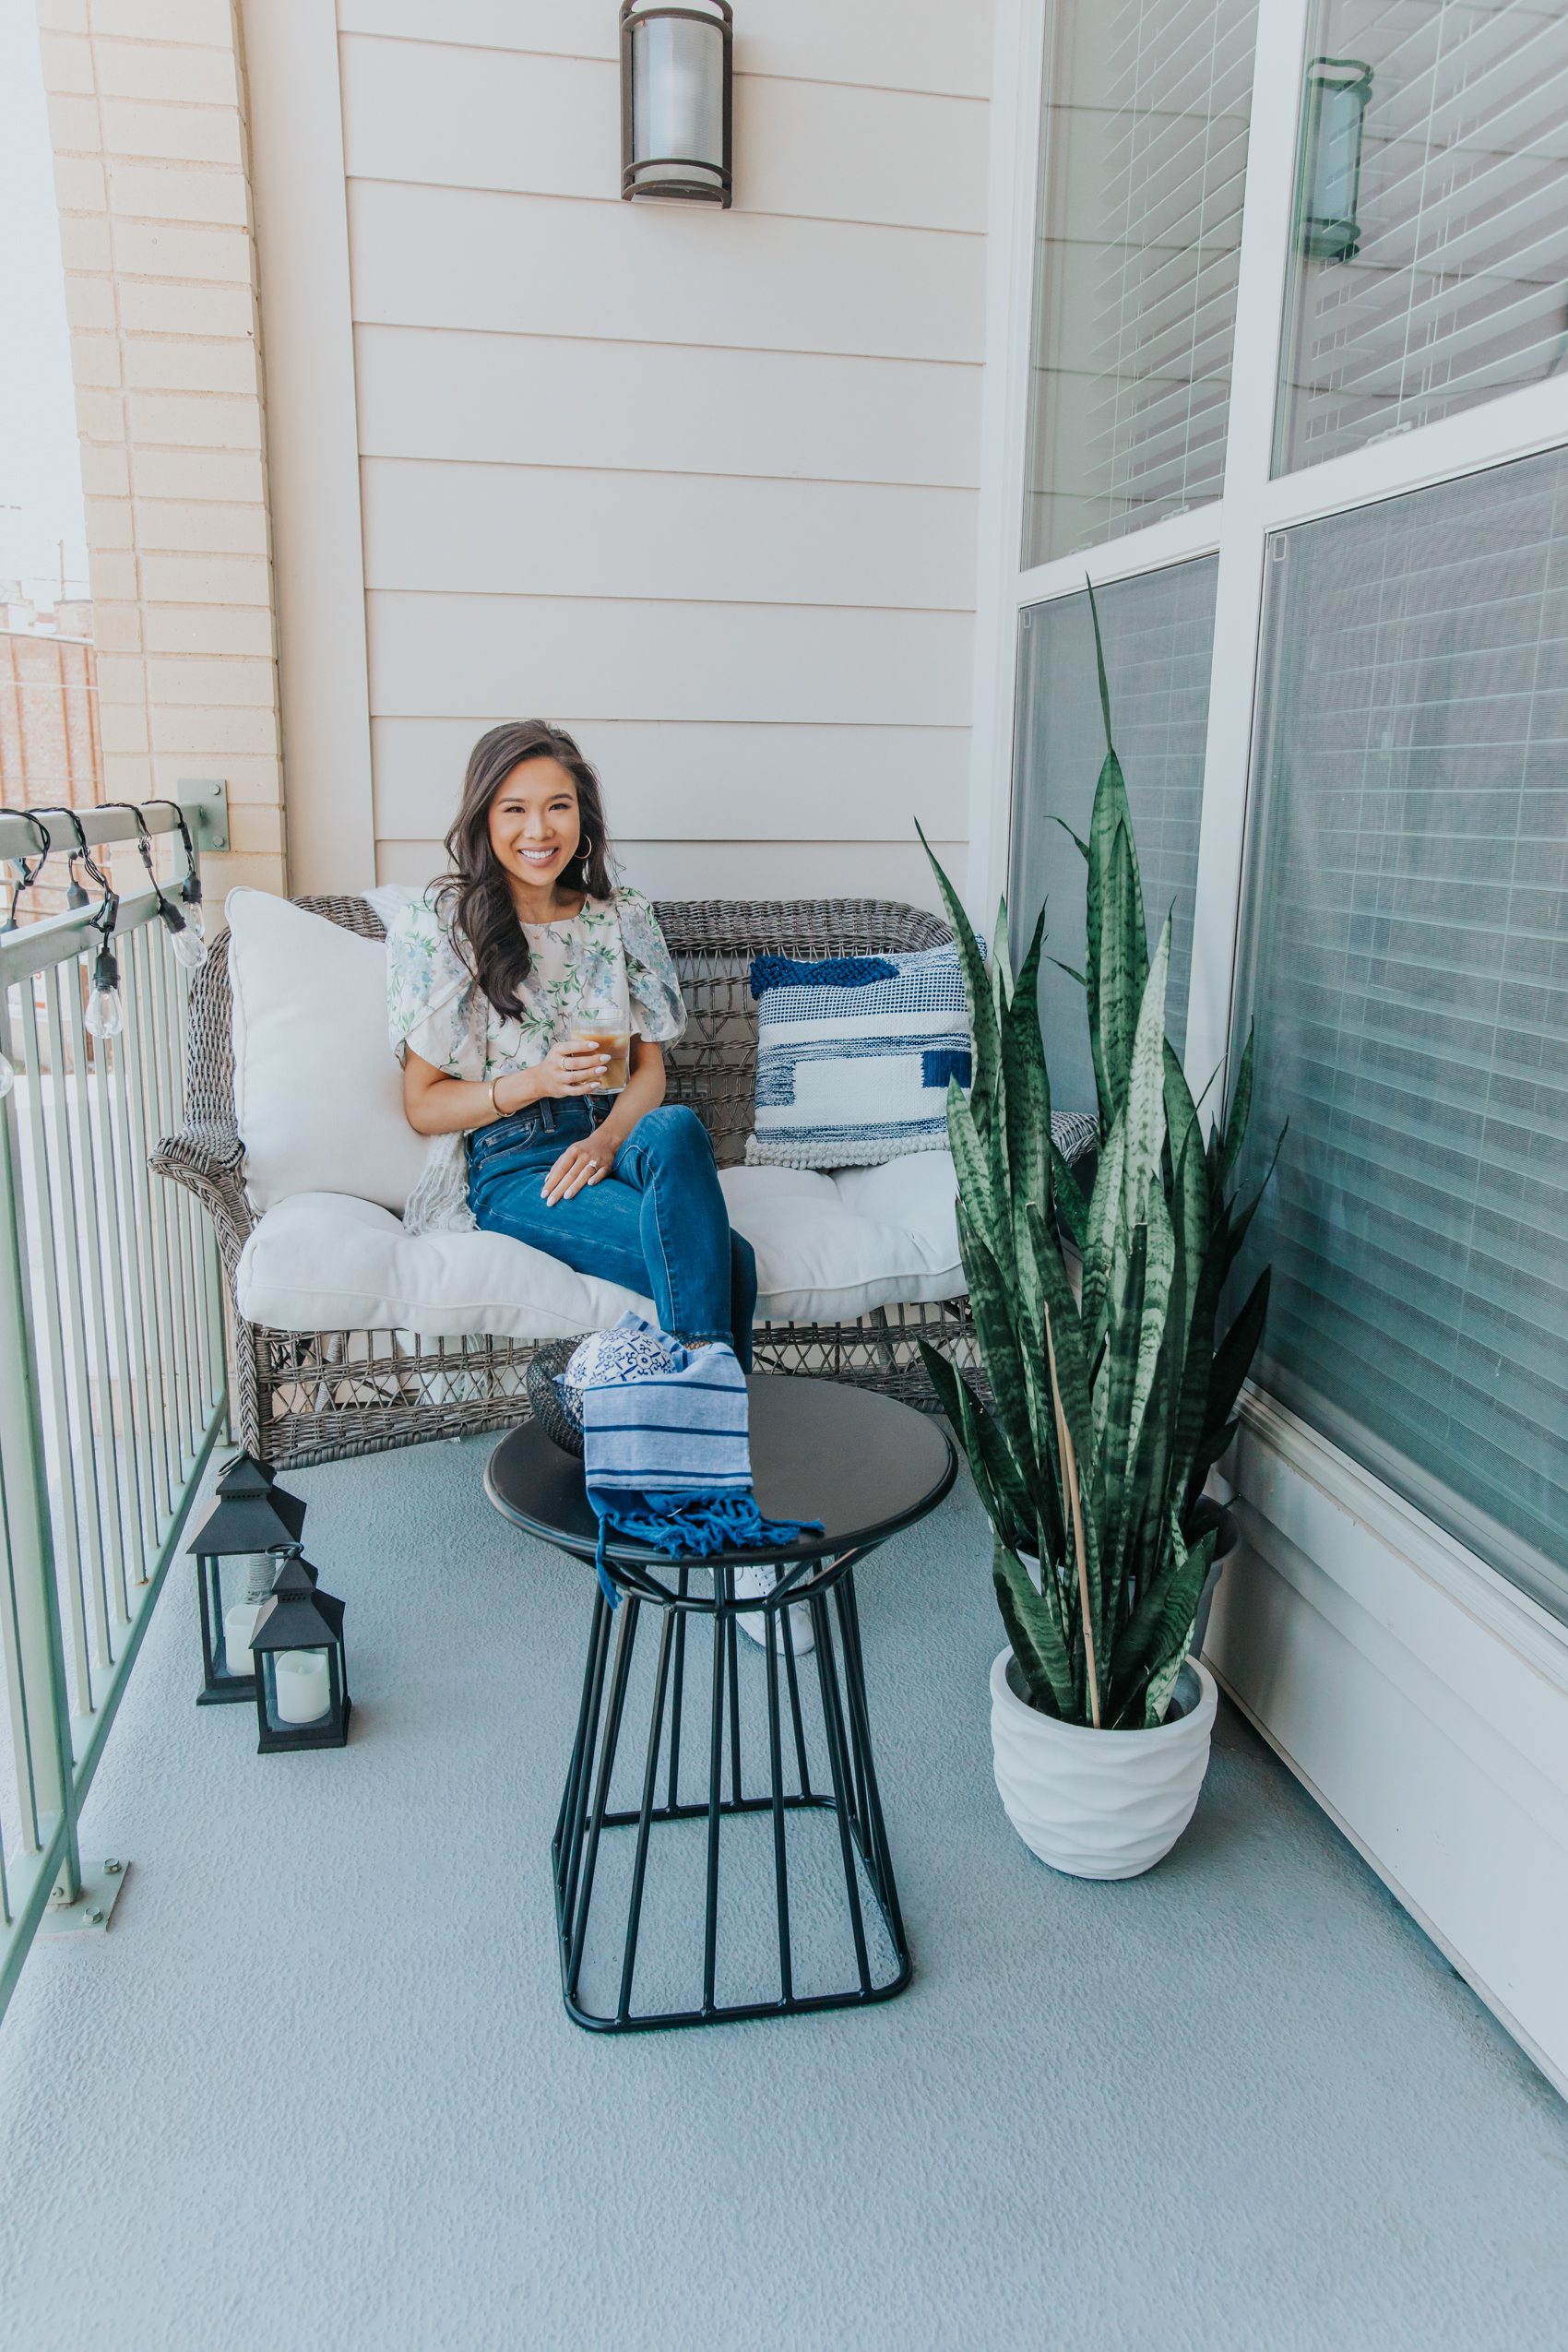 Blogger Hoang-Kim in her small apartment balcony she transformed into an oasis with a wicker settee, snake plants, pillows, lanterns and more